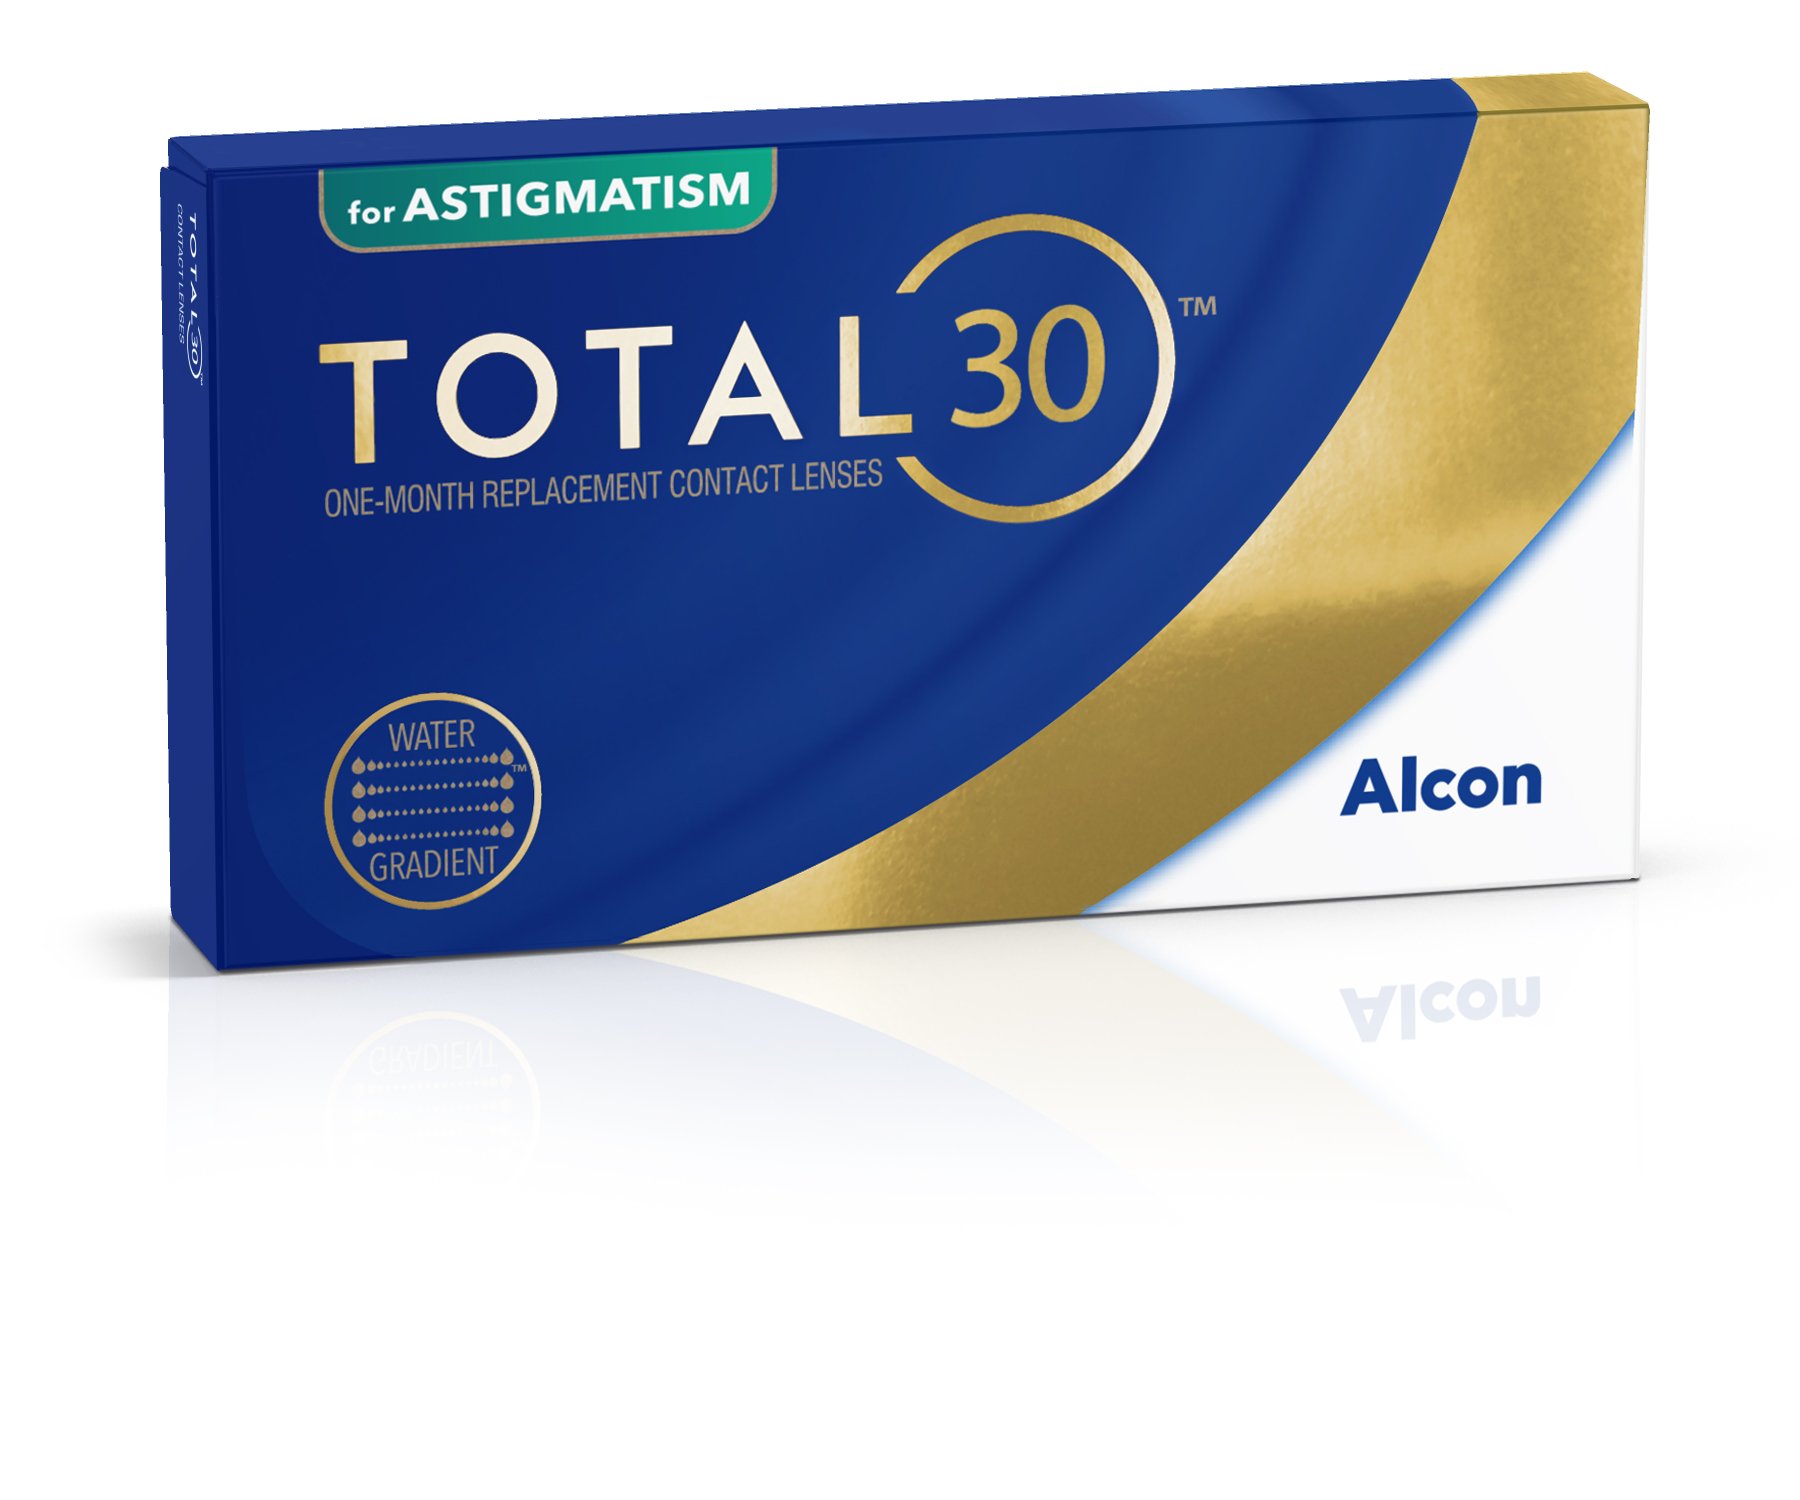 Total 30 for Astigmatism, Alcon (3 Stk.)